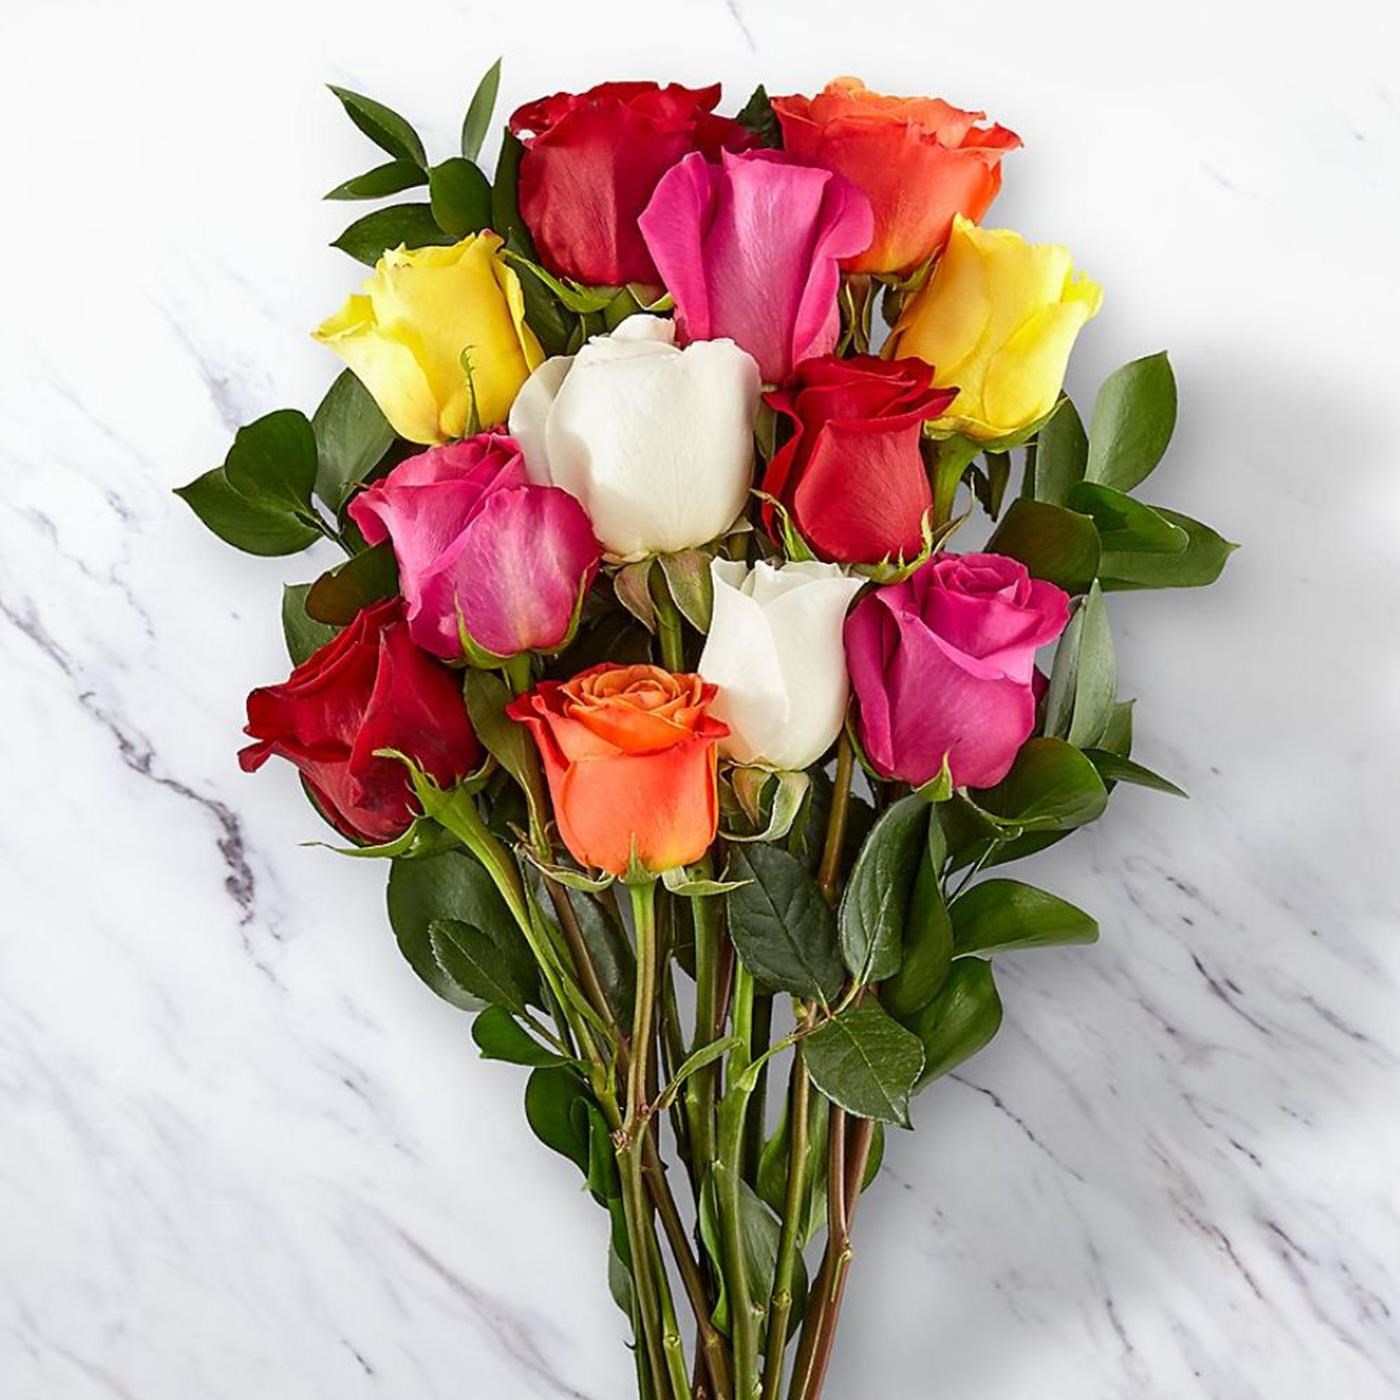 12 Mixed Roses in a bunch